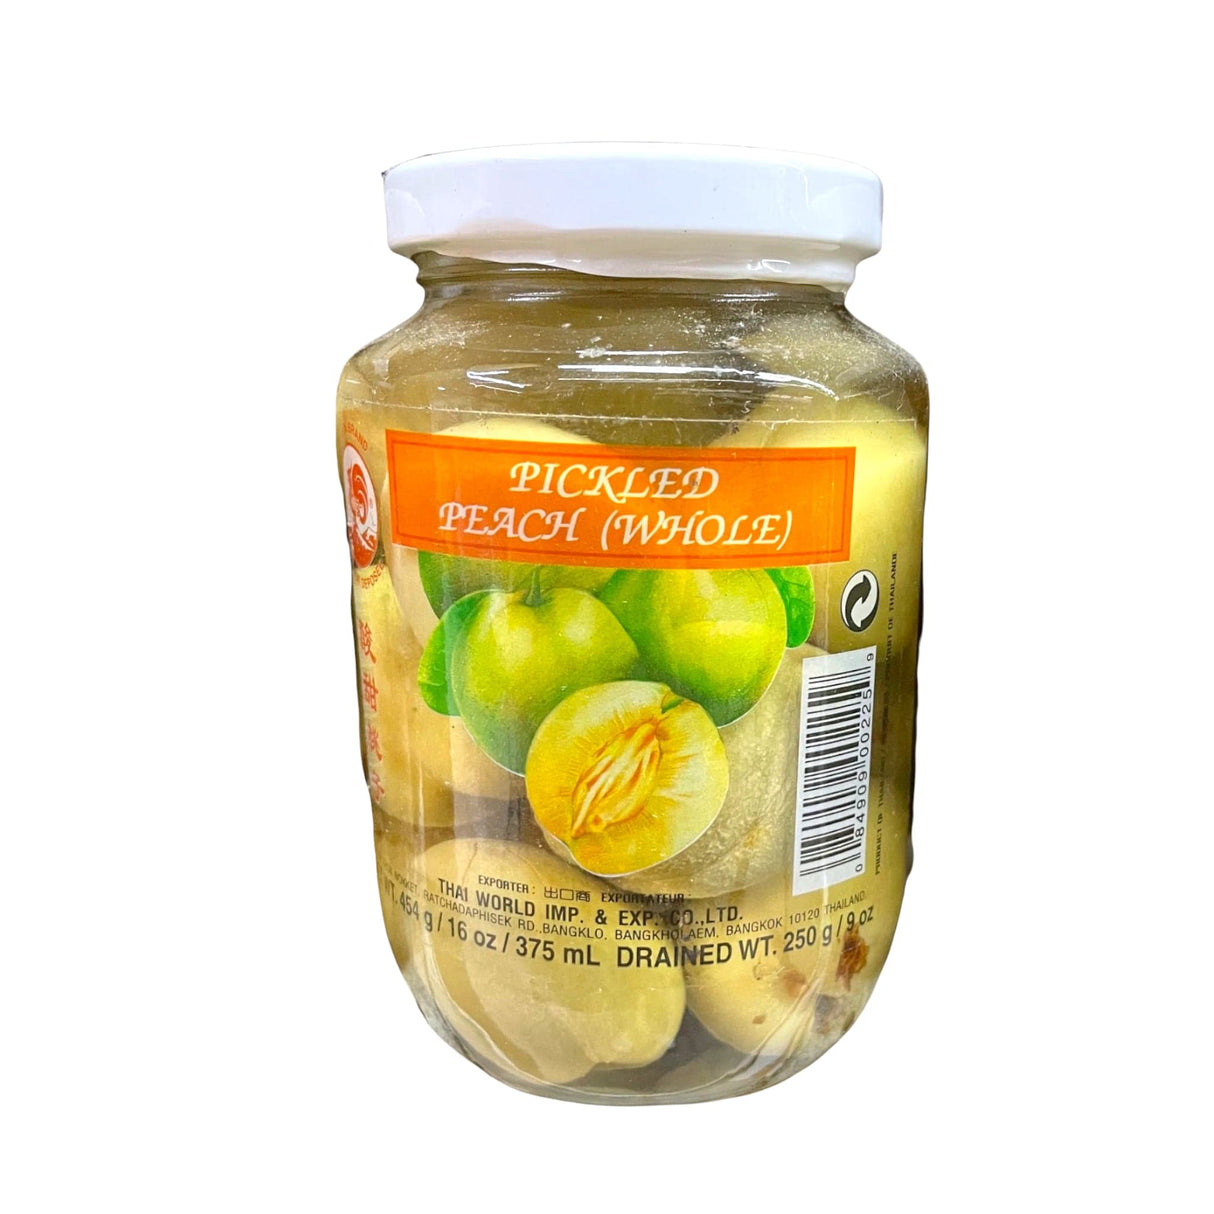 Cock Brand Pickled Peach (Whole)